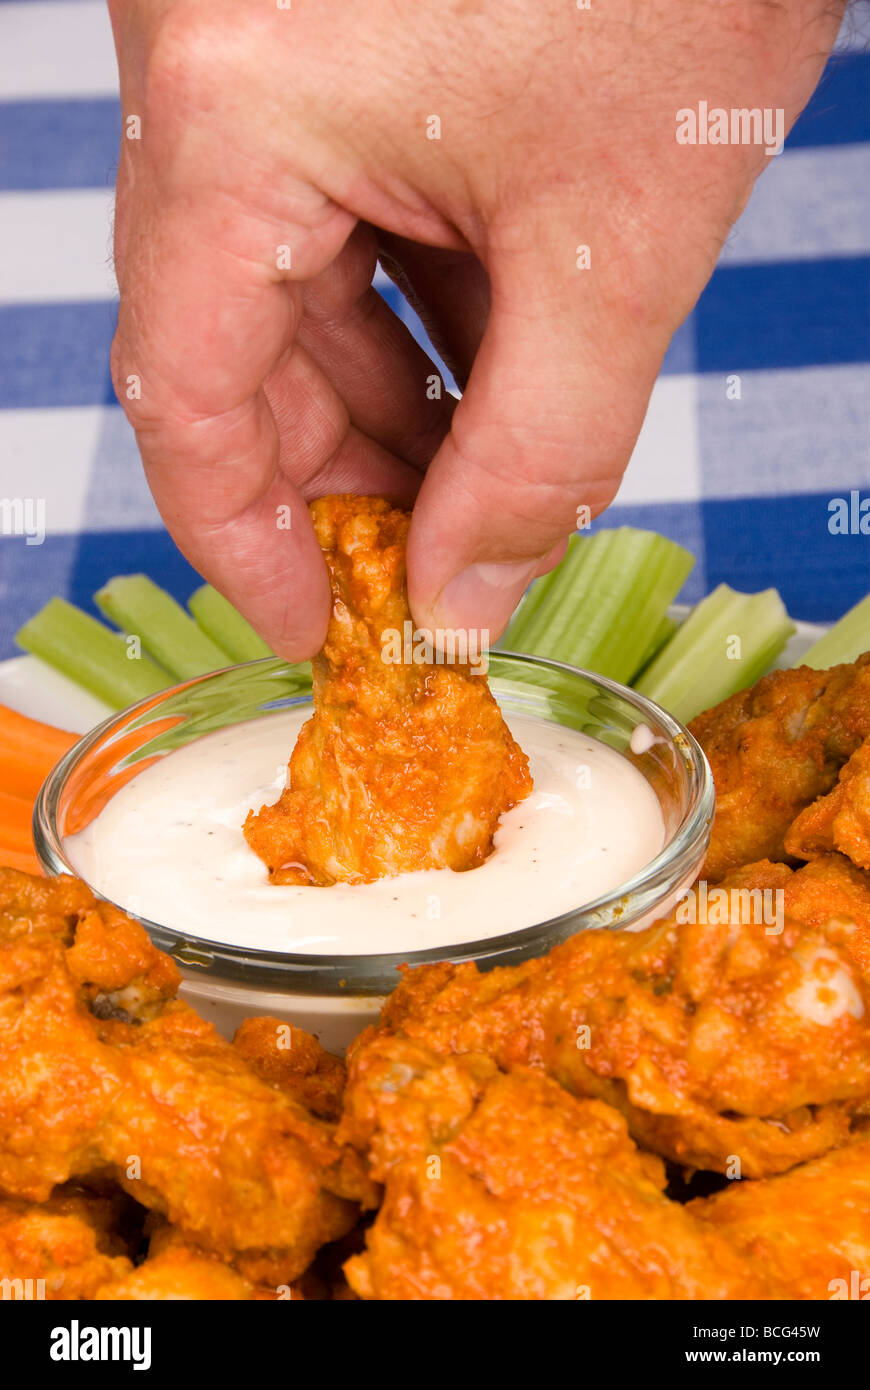 A dish of chicken hot wings celery and carrots with dipping sauce attracts a man who dips a wing into some tasty ranch sauce Stock Photo